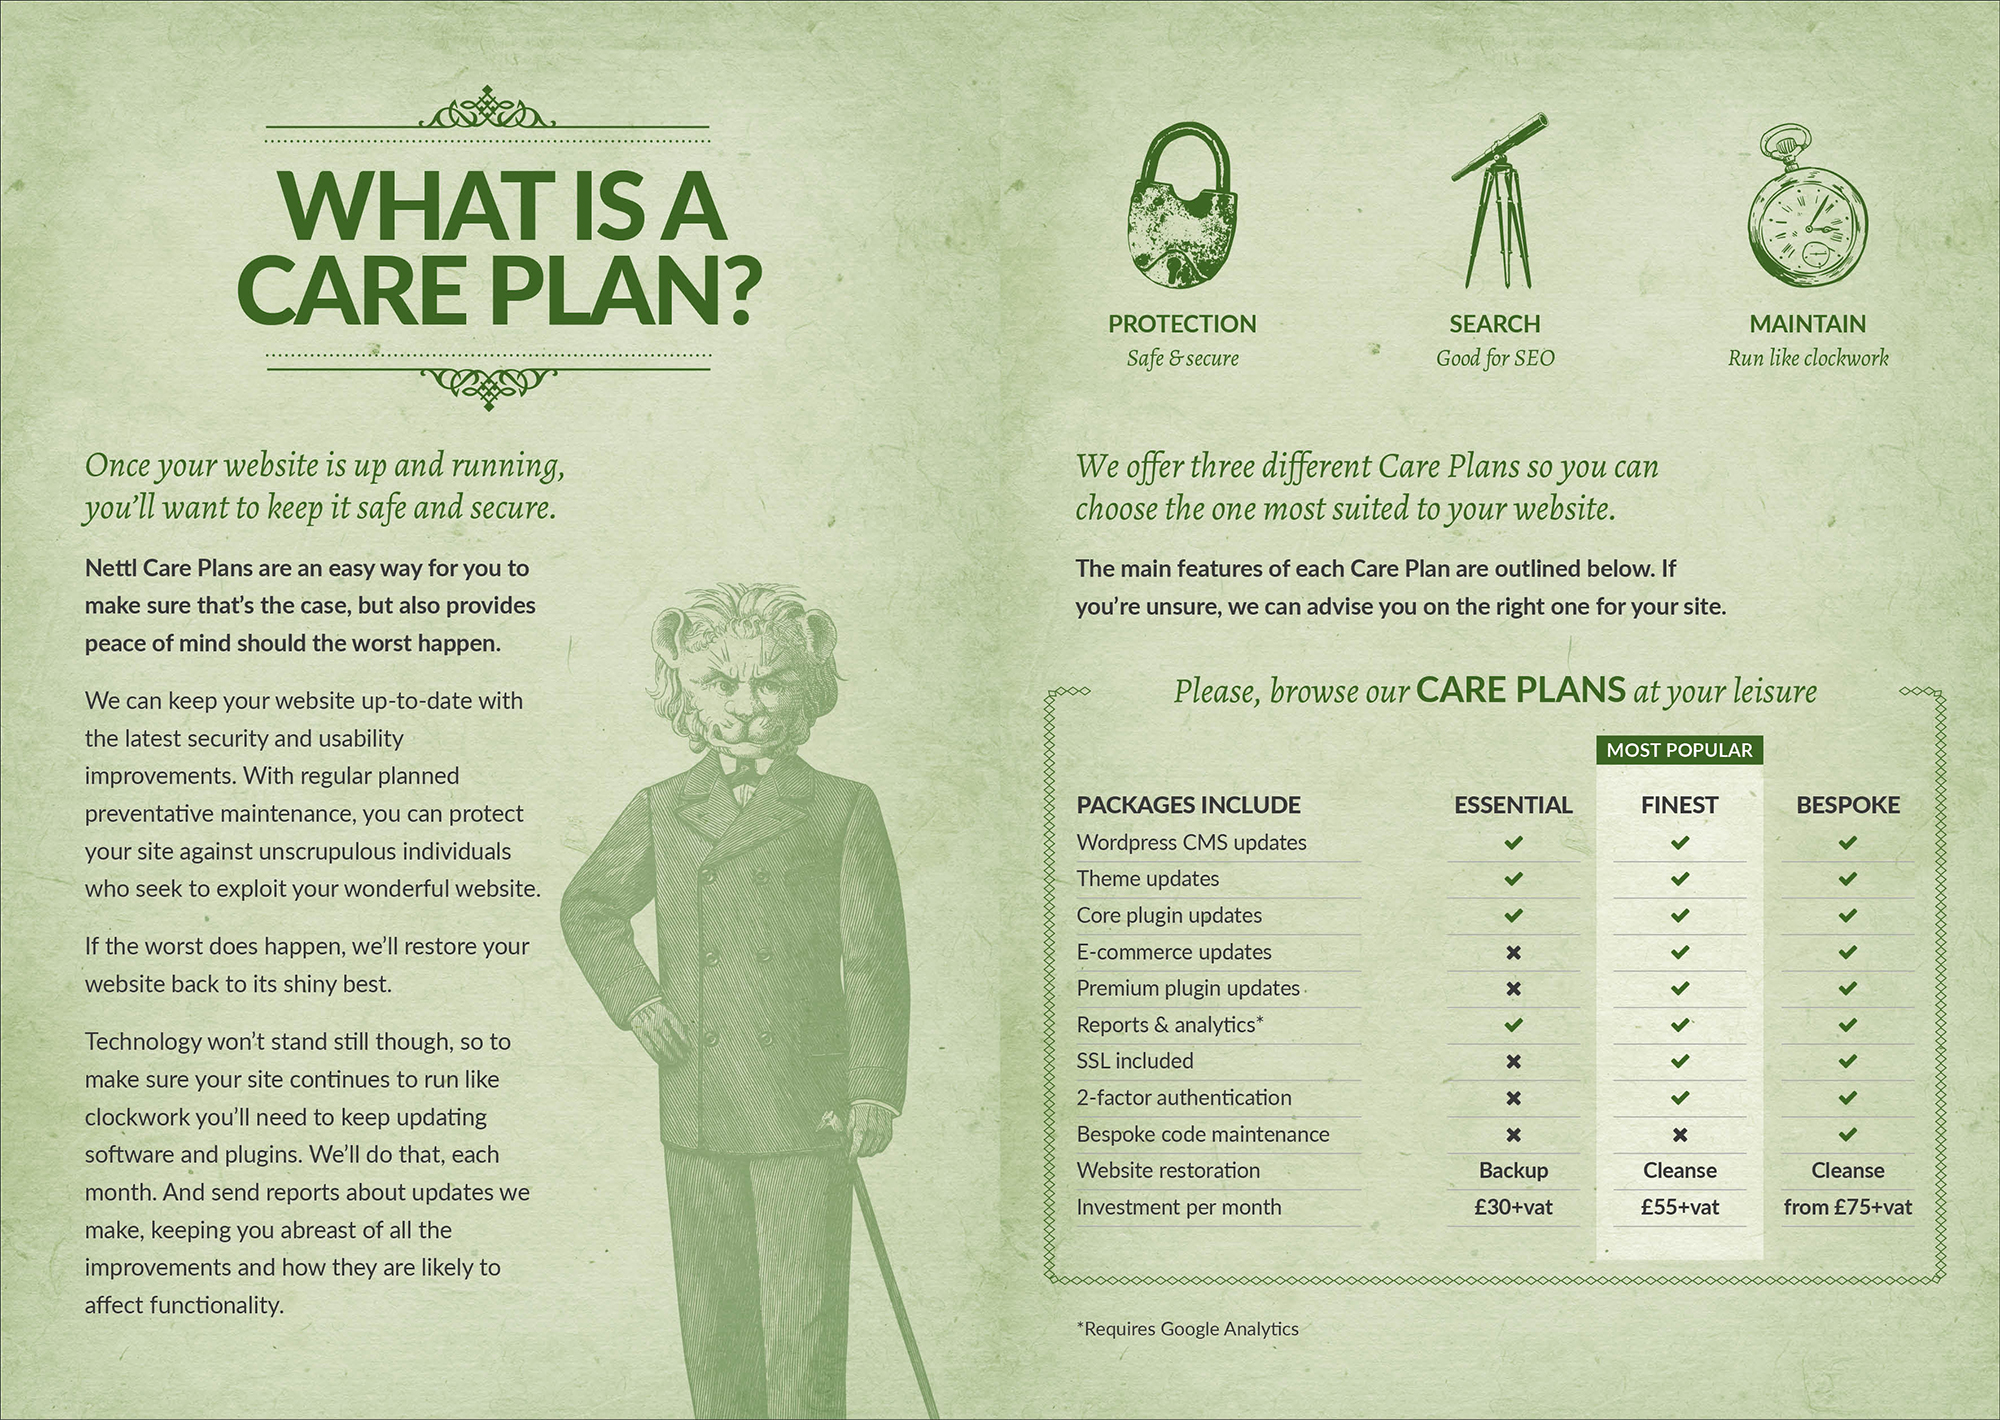 Nettl & Hyphen Care Plan to maintain your website are part of the Pay Monthly Website Packages